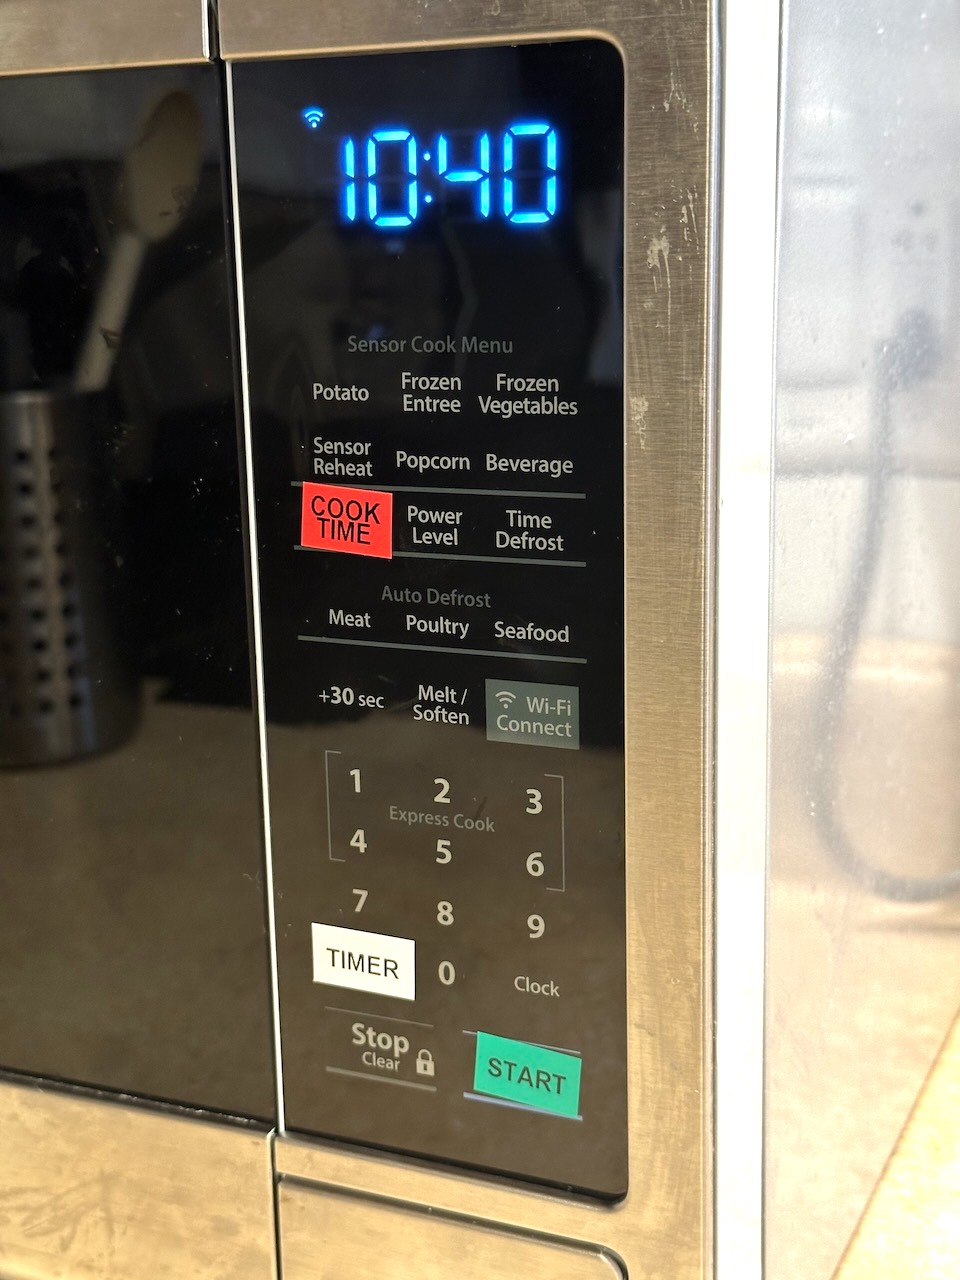 Microwave control panel with colored labels for the Cook Time, Timer, and Start buttons